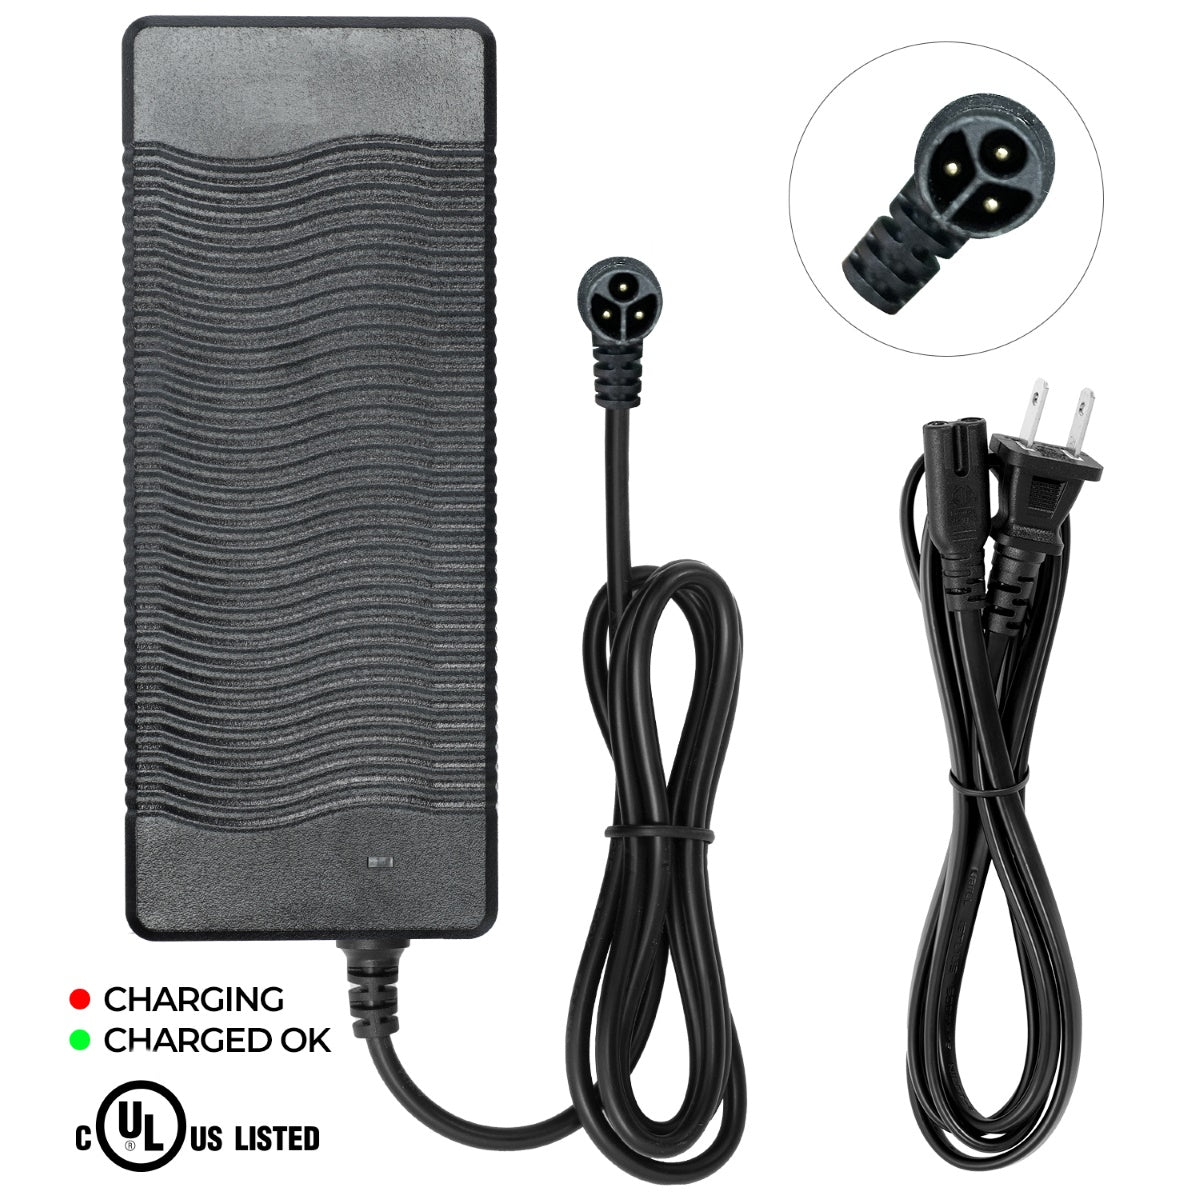 Charger for Ducati E-Bike